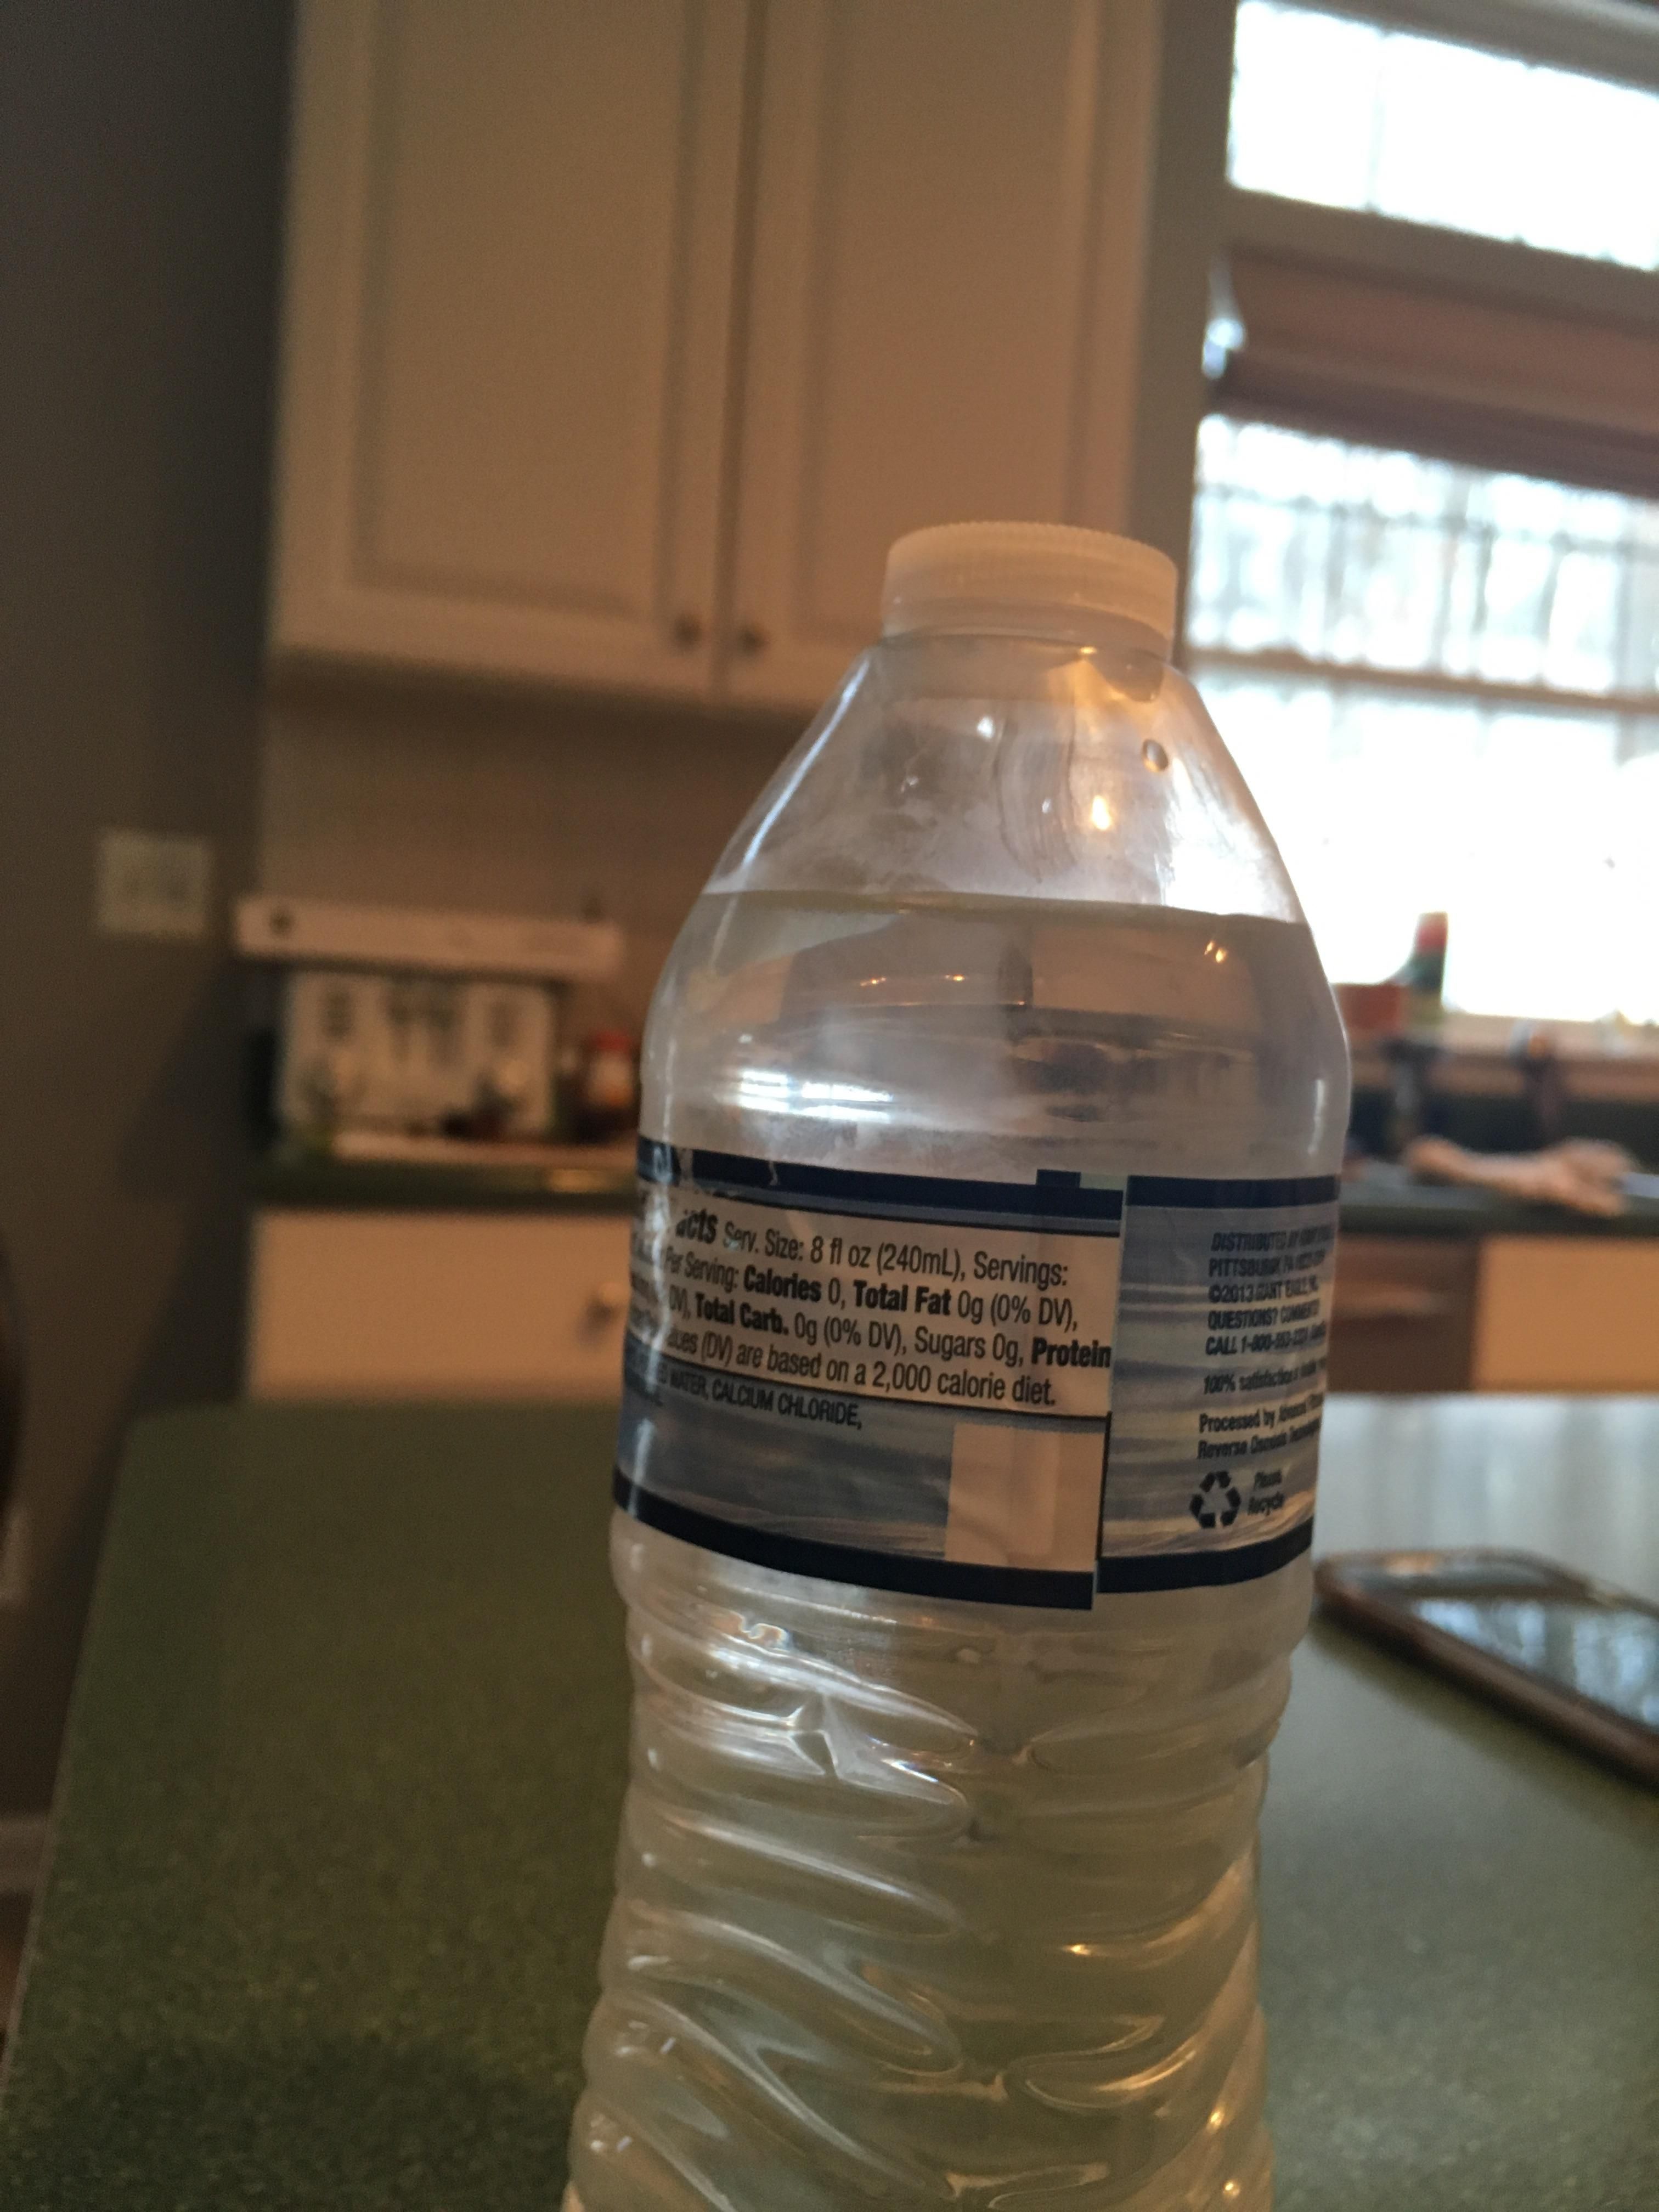 When someone touches your neck